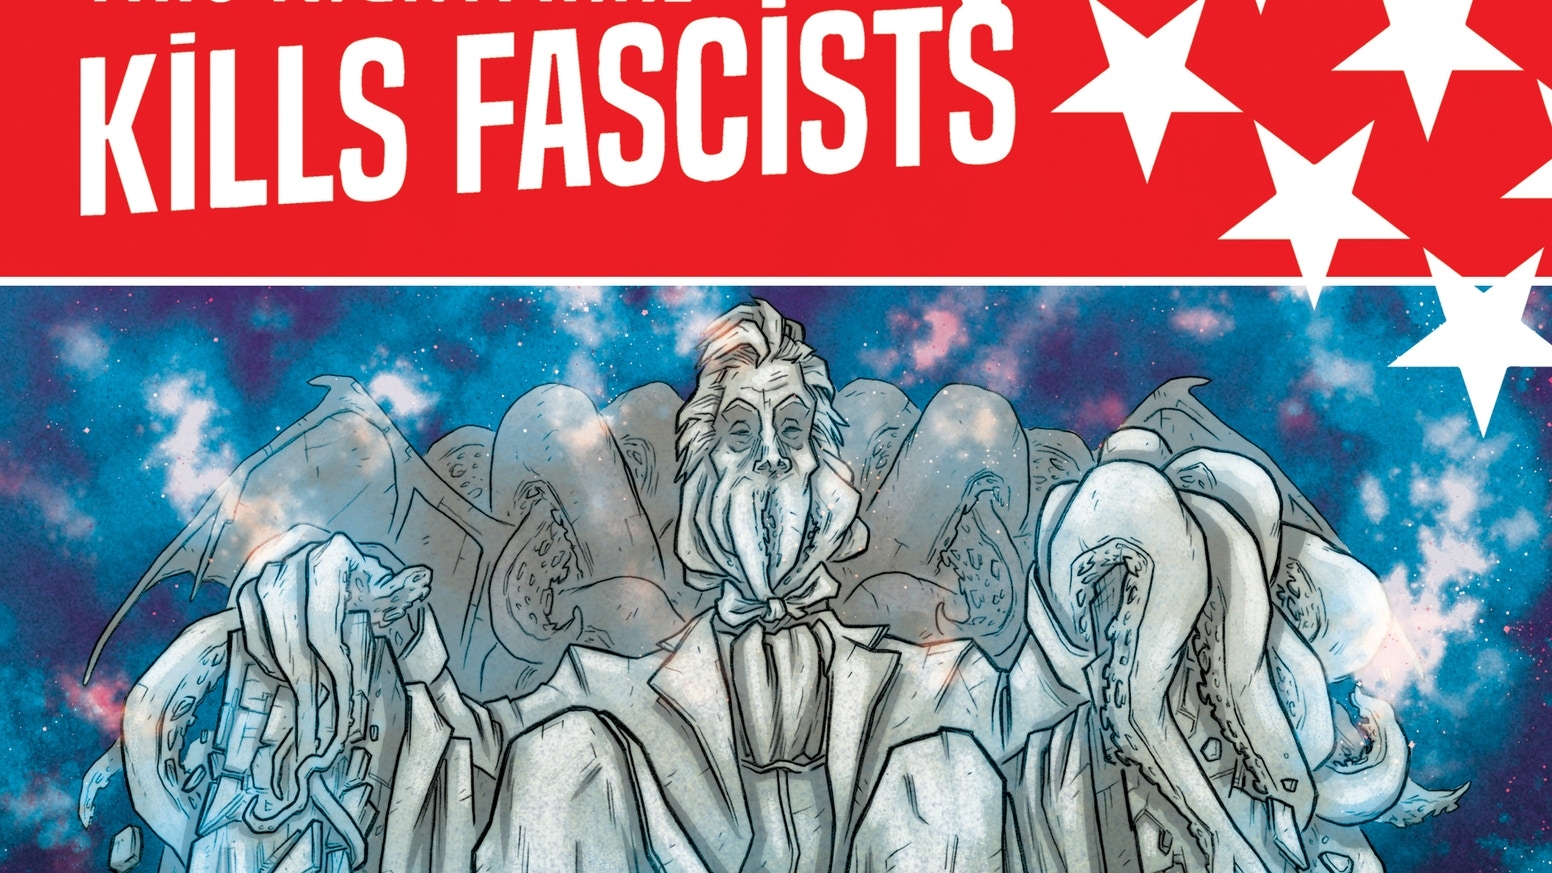 This Nightmare Kills Fascists – A Comics Anthology Has Laucnched